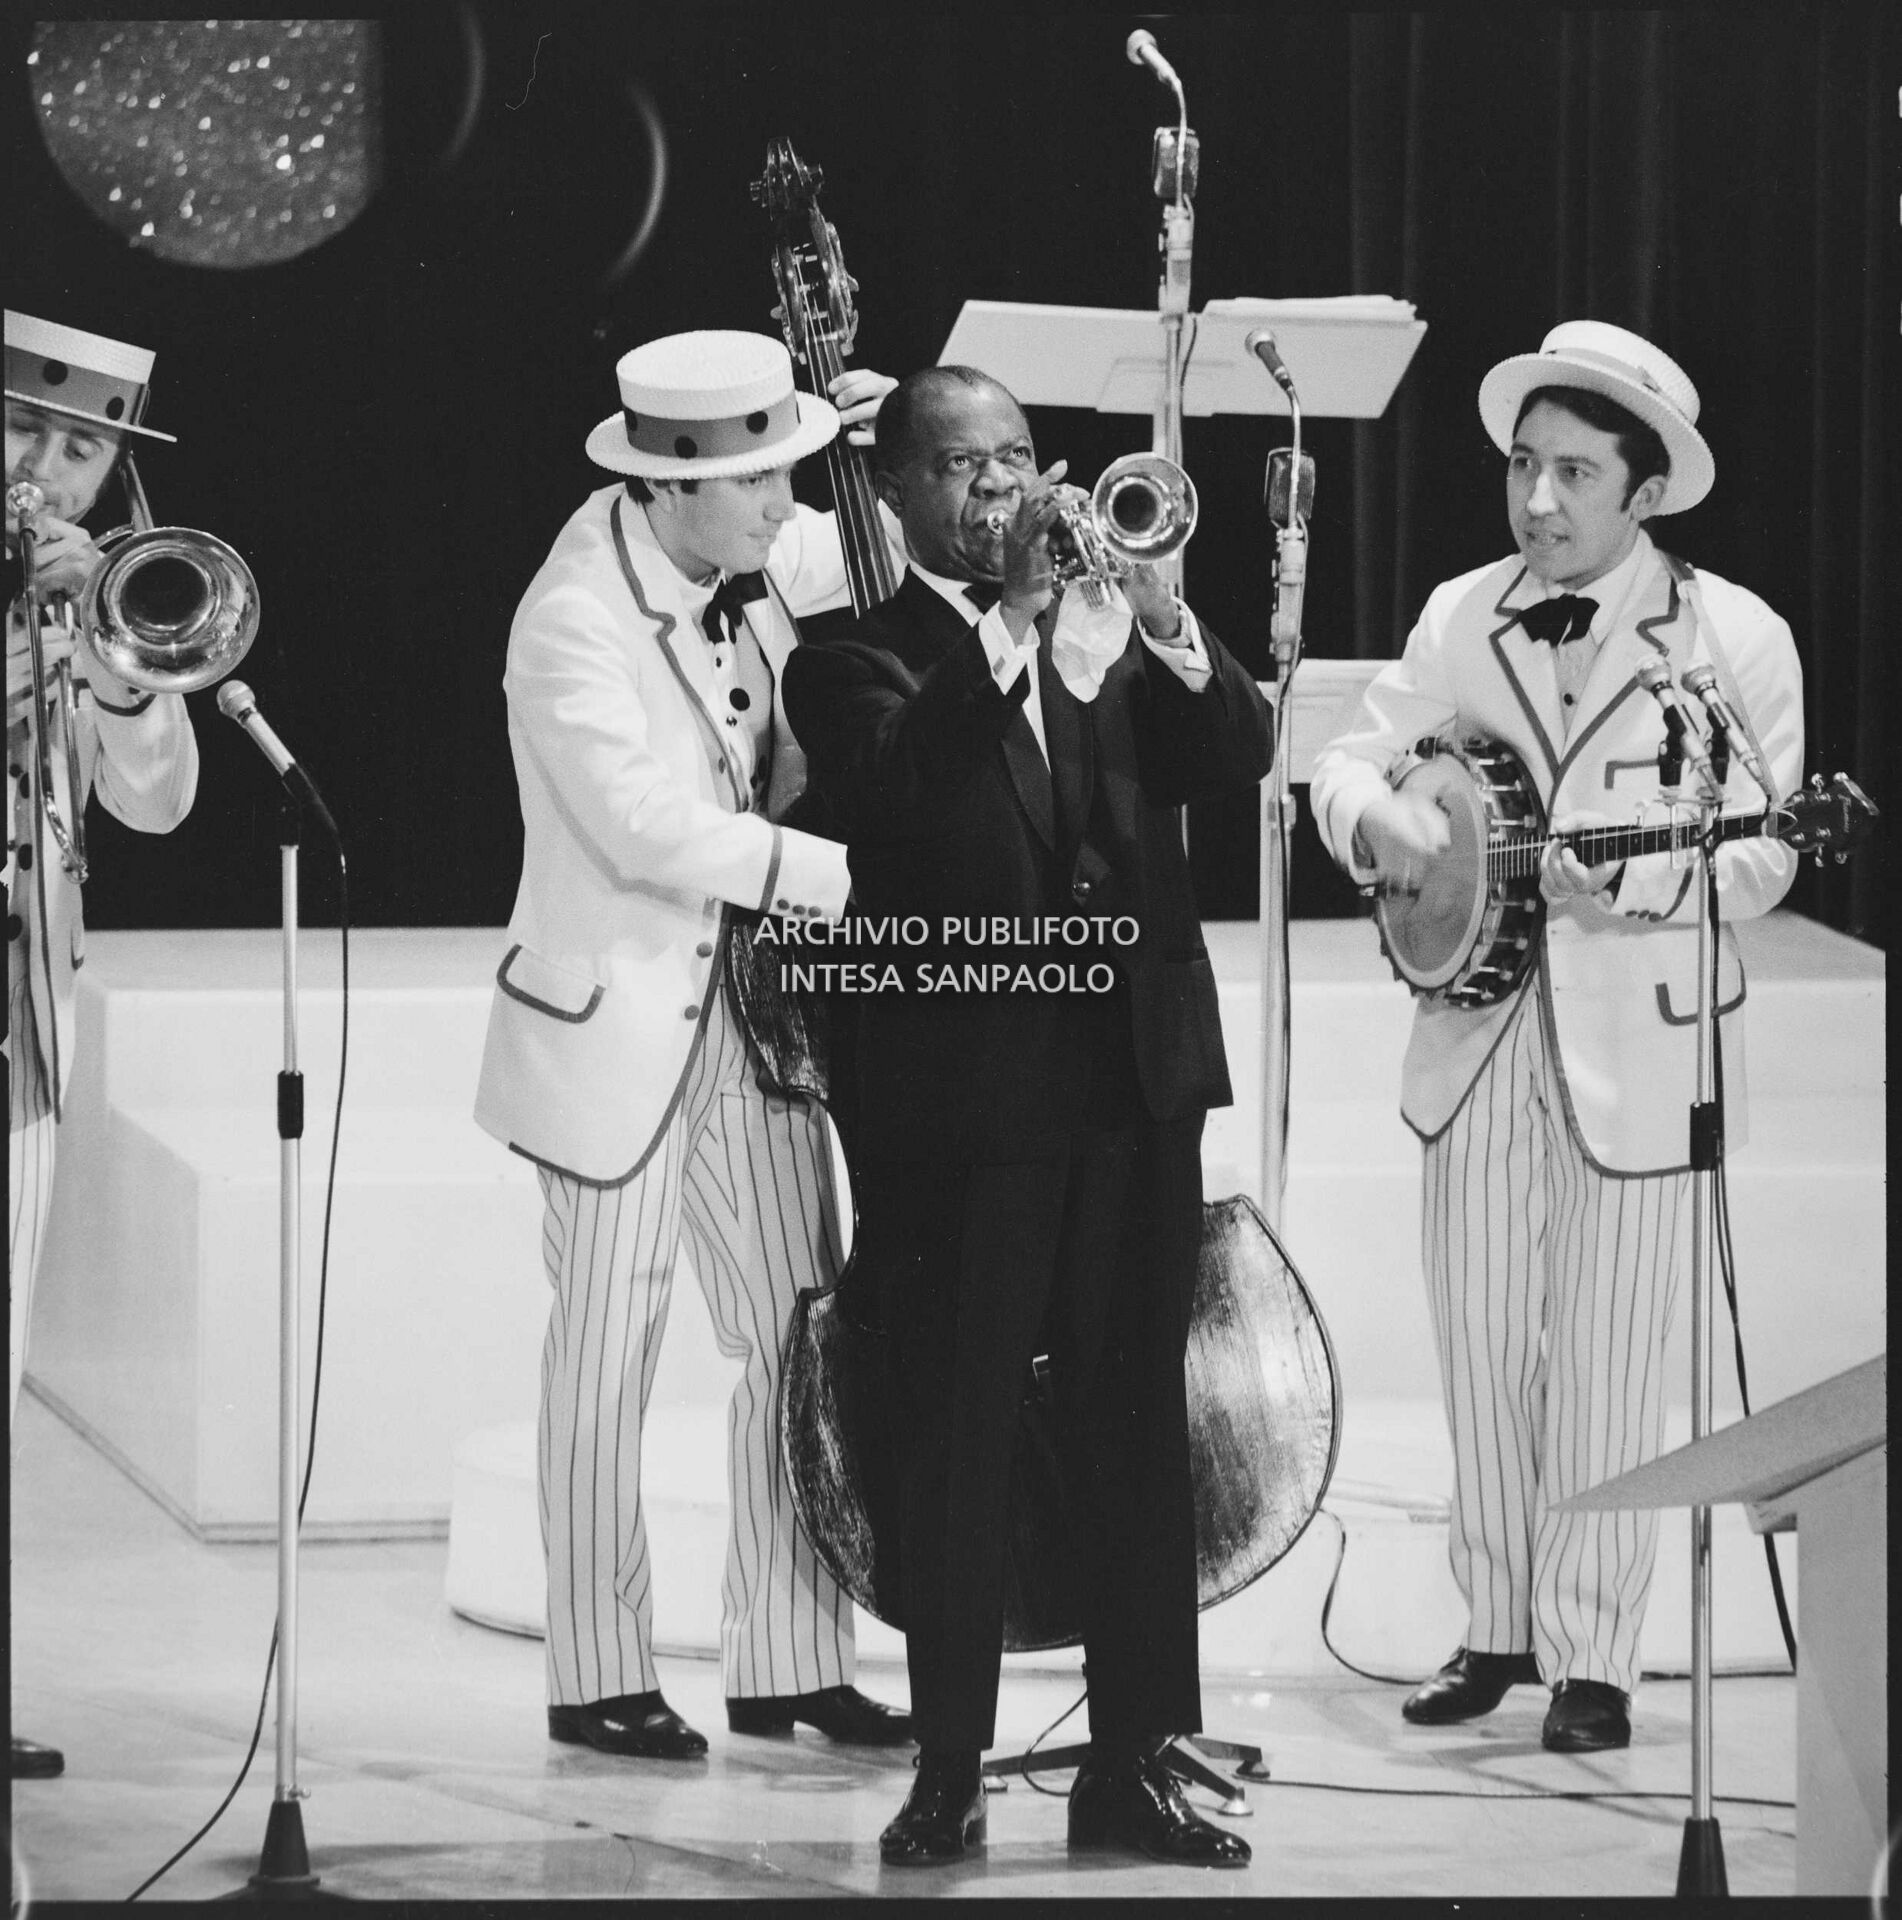 Louis Armstrong on stage at the 18th Sanremo Festival in which he participated with the song "Mi va di cantare" paired with Lara Saint Paul